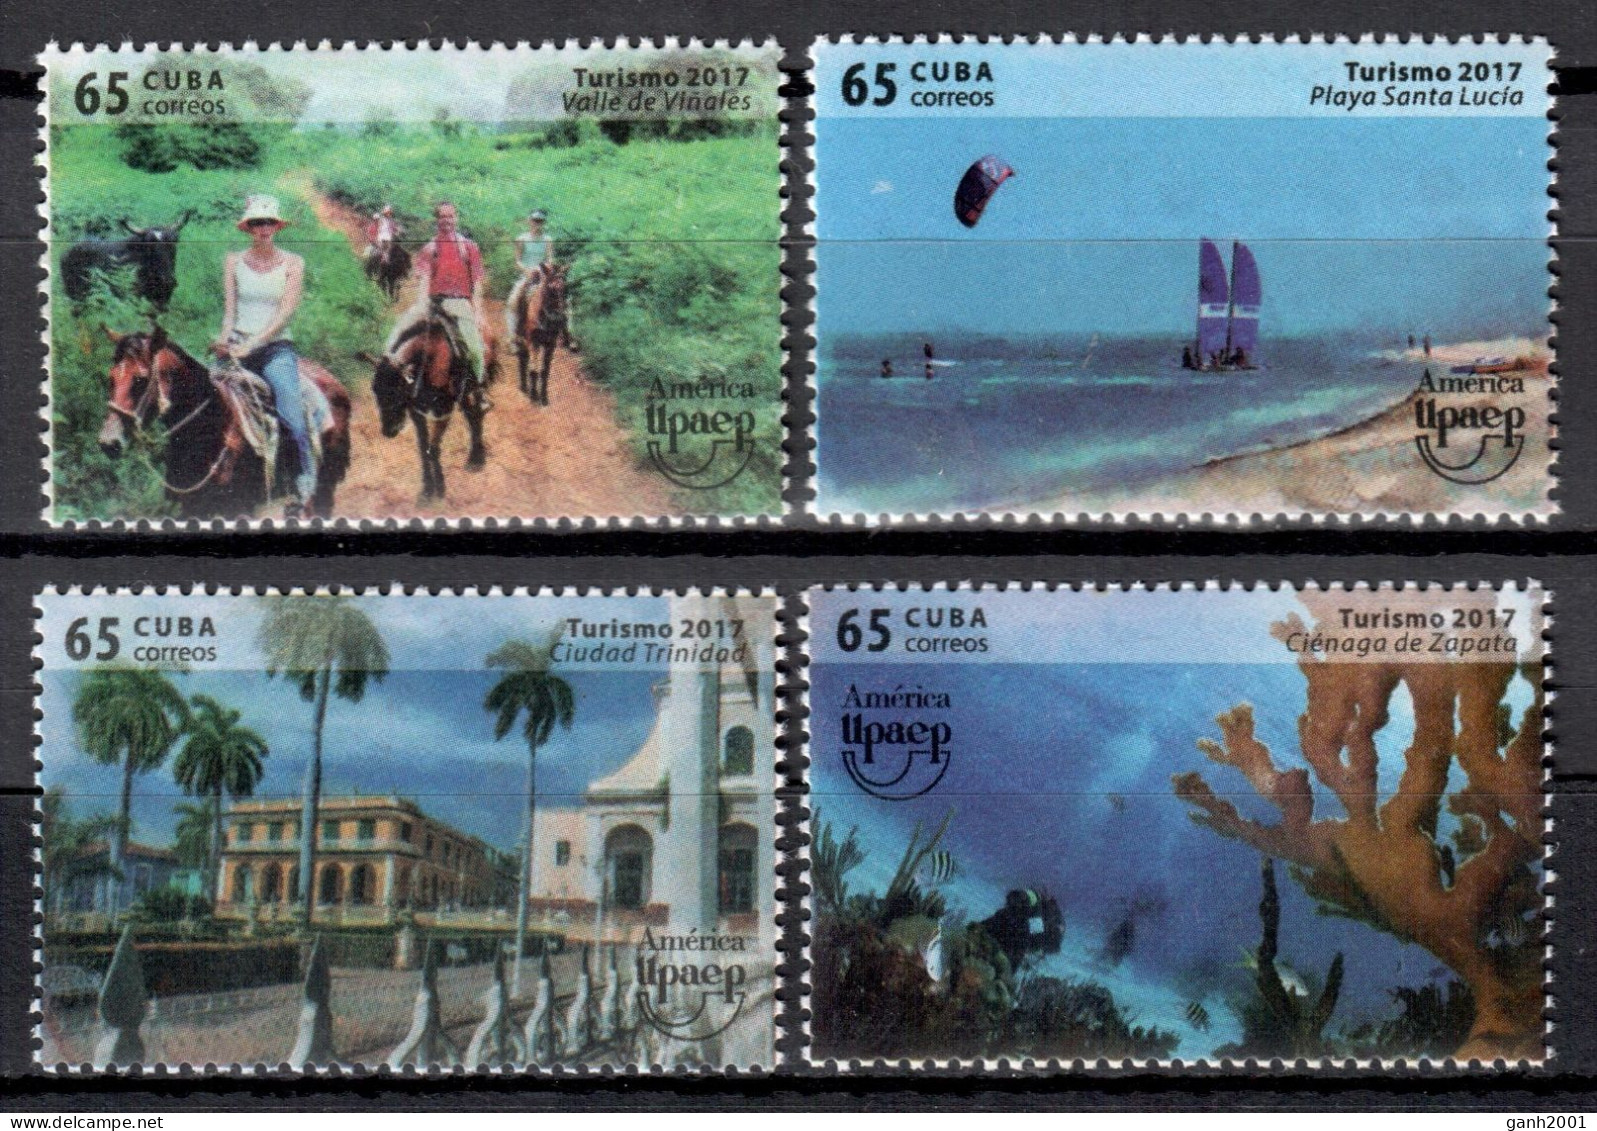 Cuba 2017 / UPAEP Tourism MNH Turismo Tourismus / Hq45  22-38 - Joint Issues